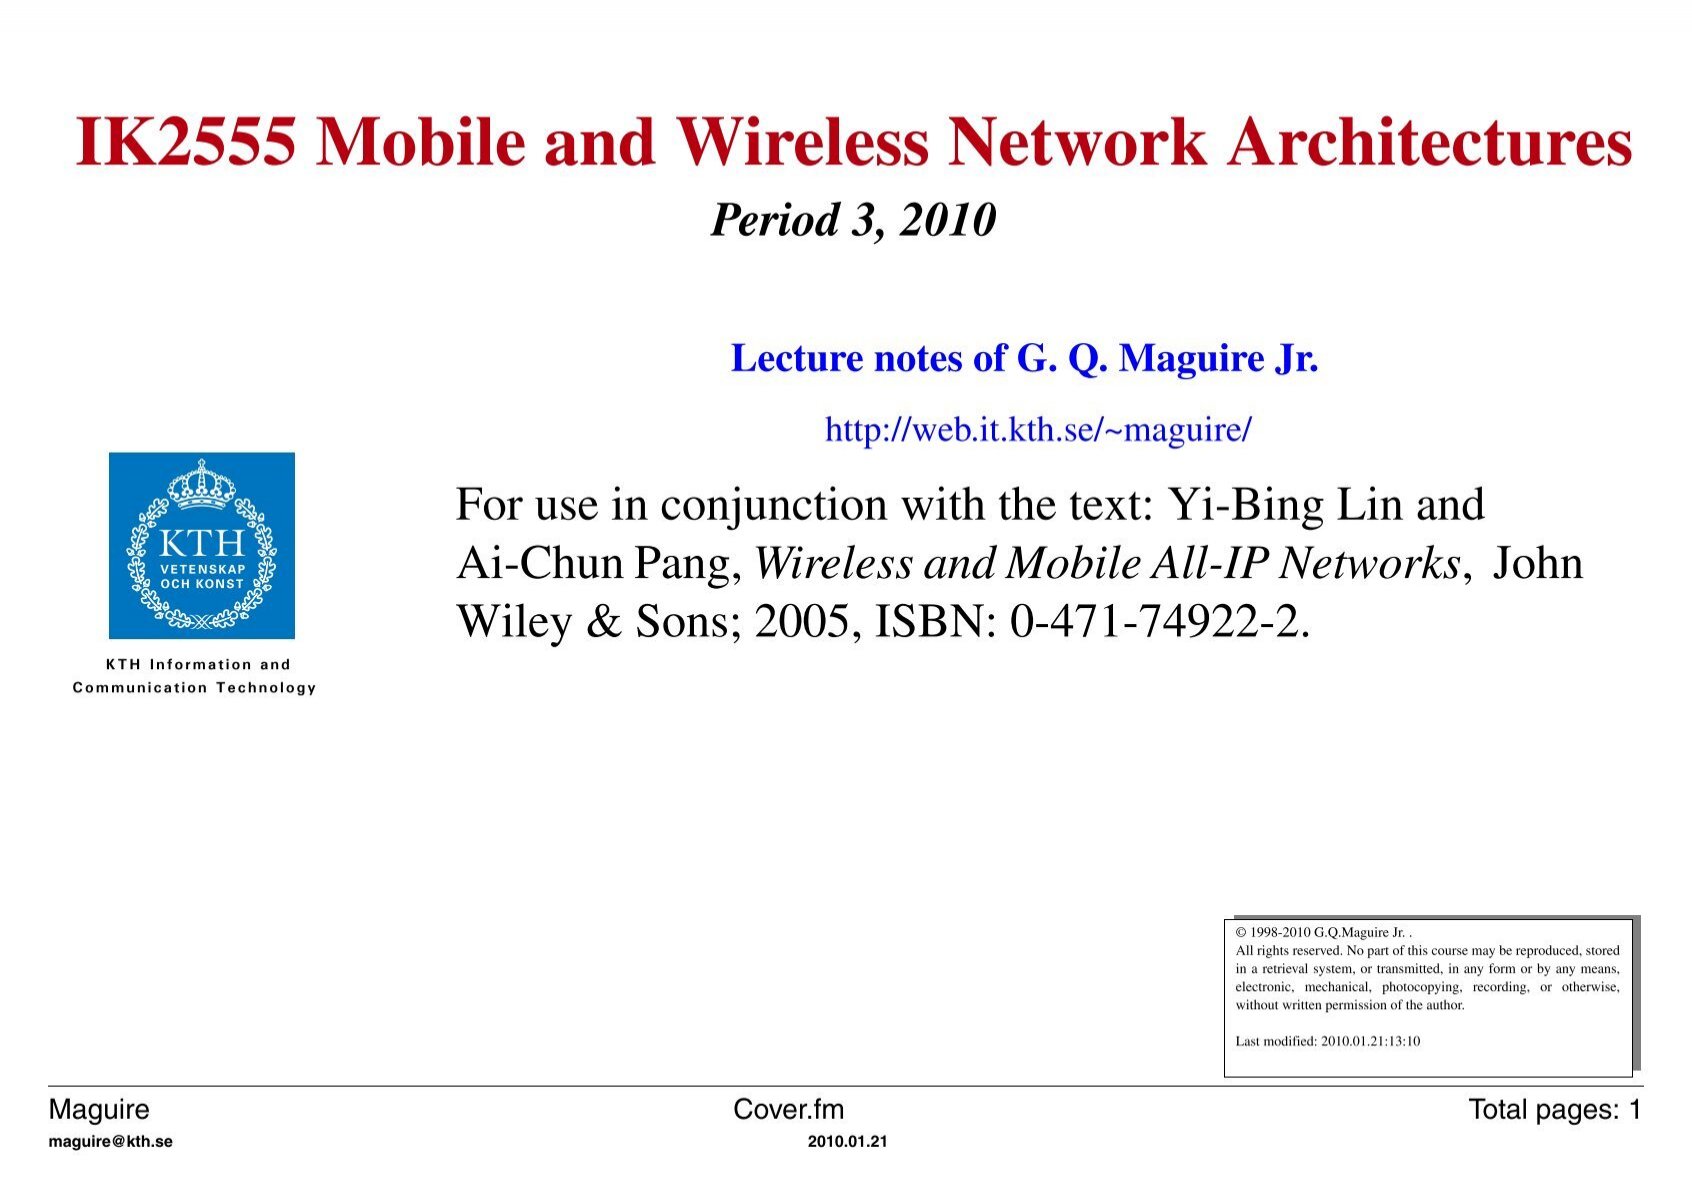 Cloud Network Architecture for Online & Mobile Gaming Industry, by Sherry  Wei